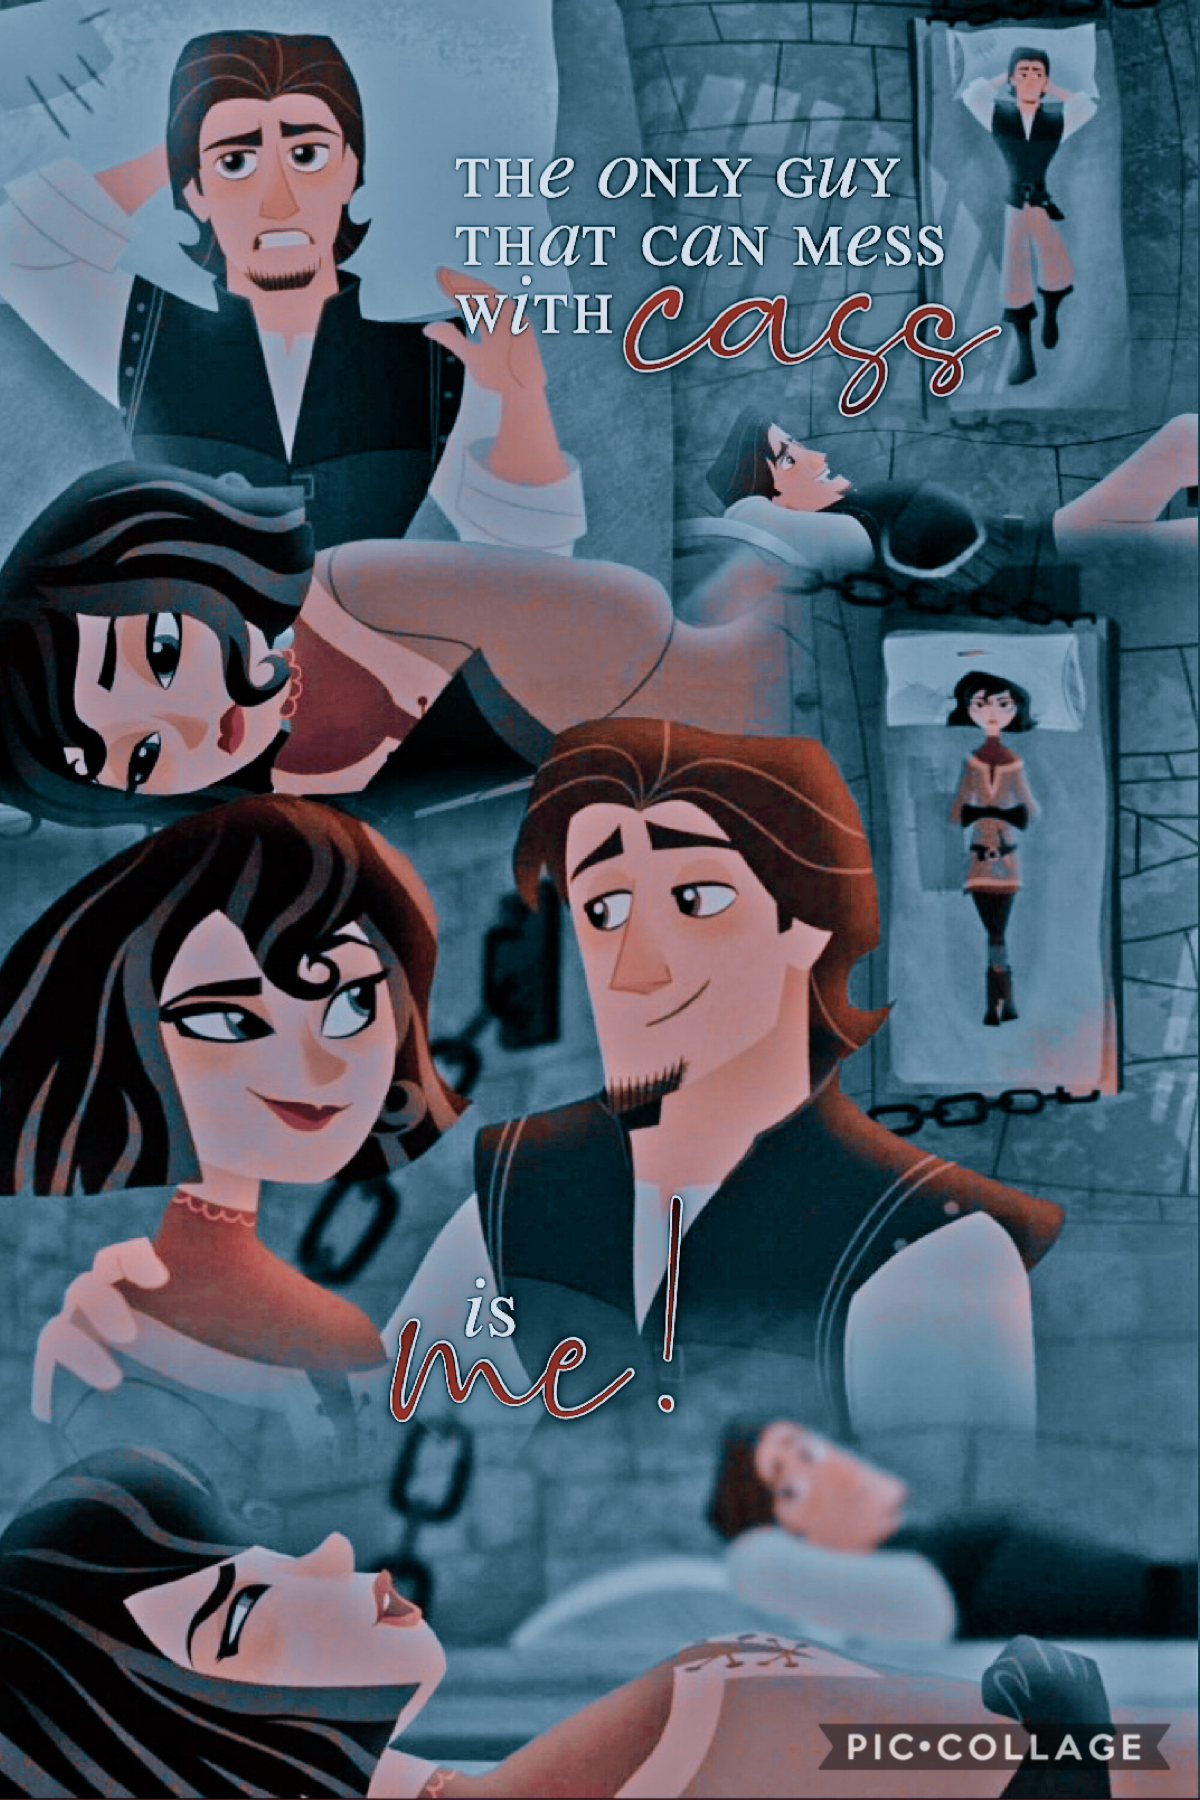 new COMPLEX edit (tap)

Info: Eugene & Cass (tangled)


Check me out on PicsArt!

@dancingintheraine for complex edits

&

@raineyxday for outline and blend edits


—————————————————————————